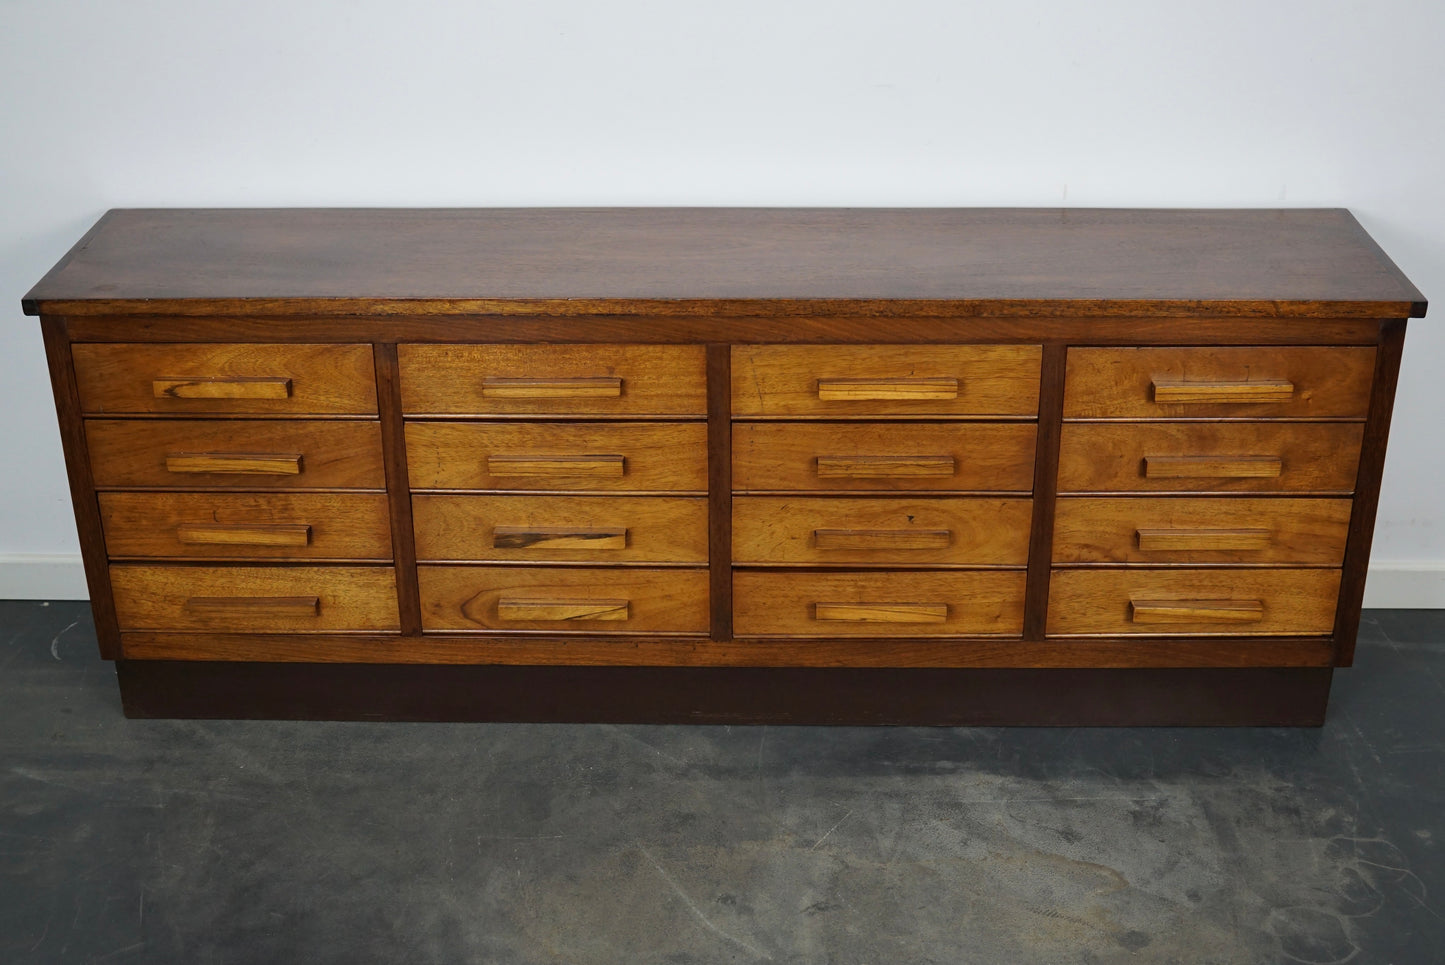 German Industrial Walnut Apothecary Cabinet / Lowboard, Mid-20th Century